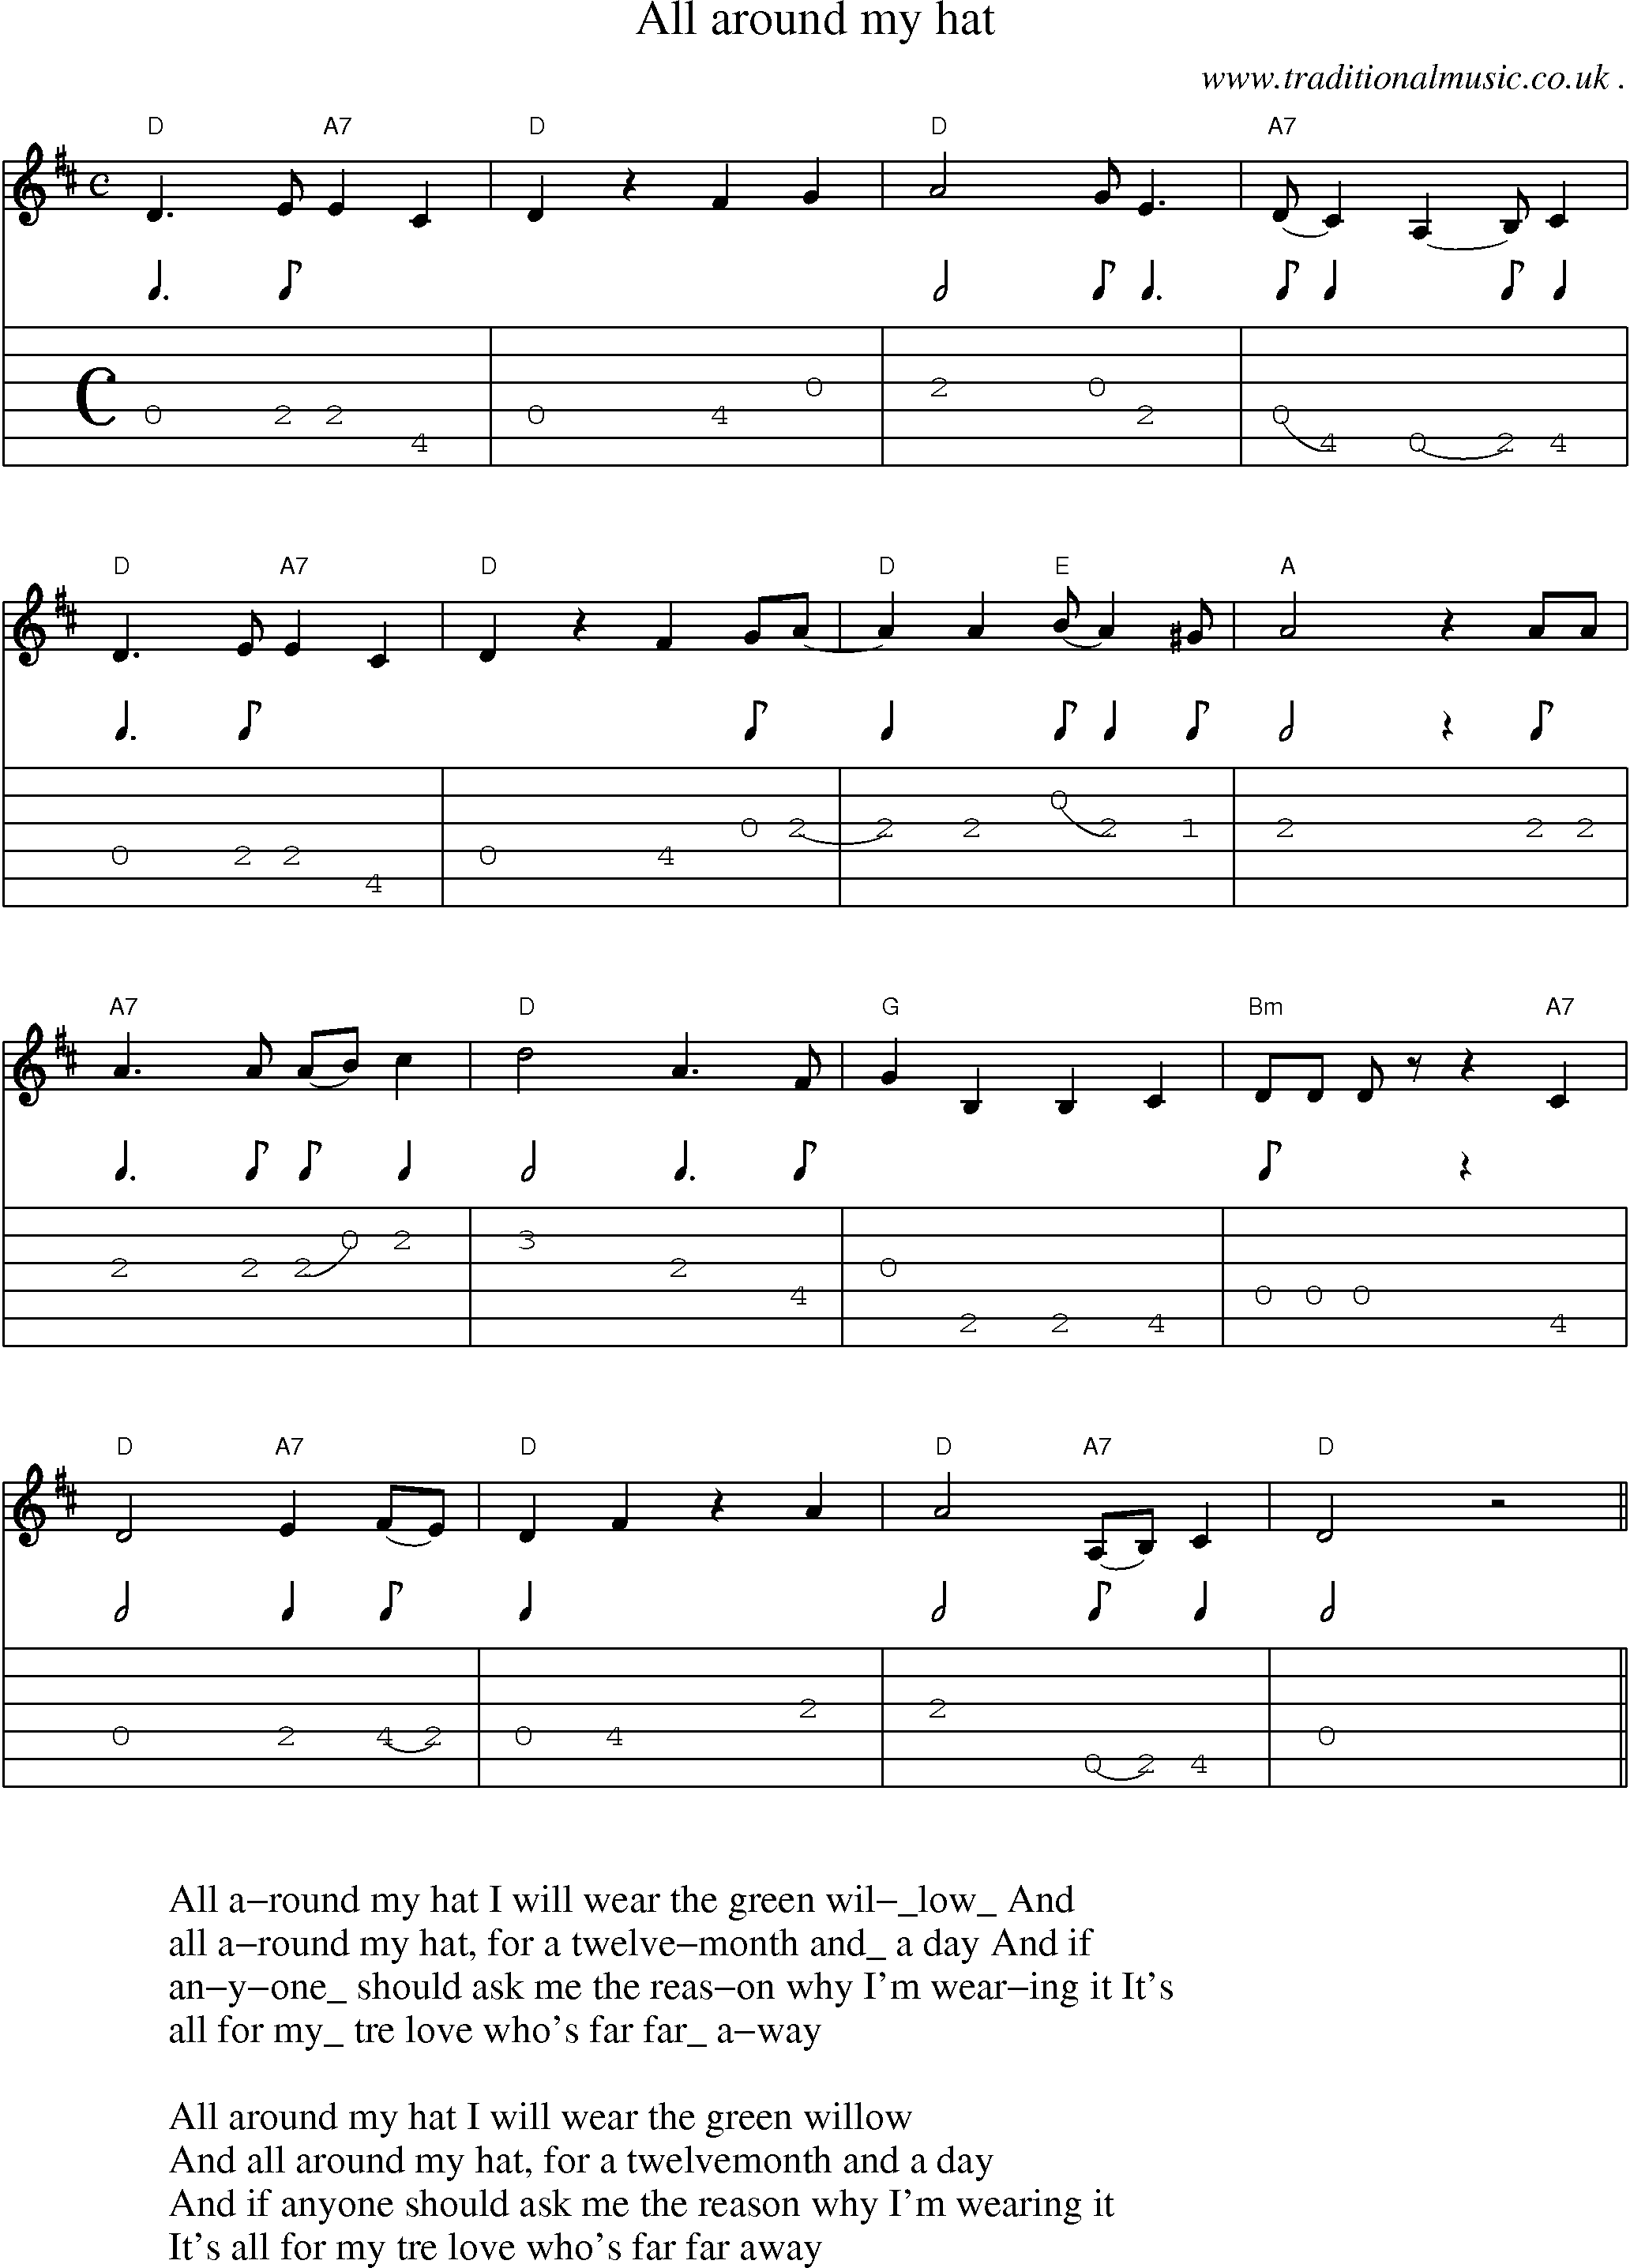 Sheet-Music and Guitar Tabs for All Around My Hat